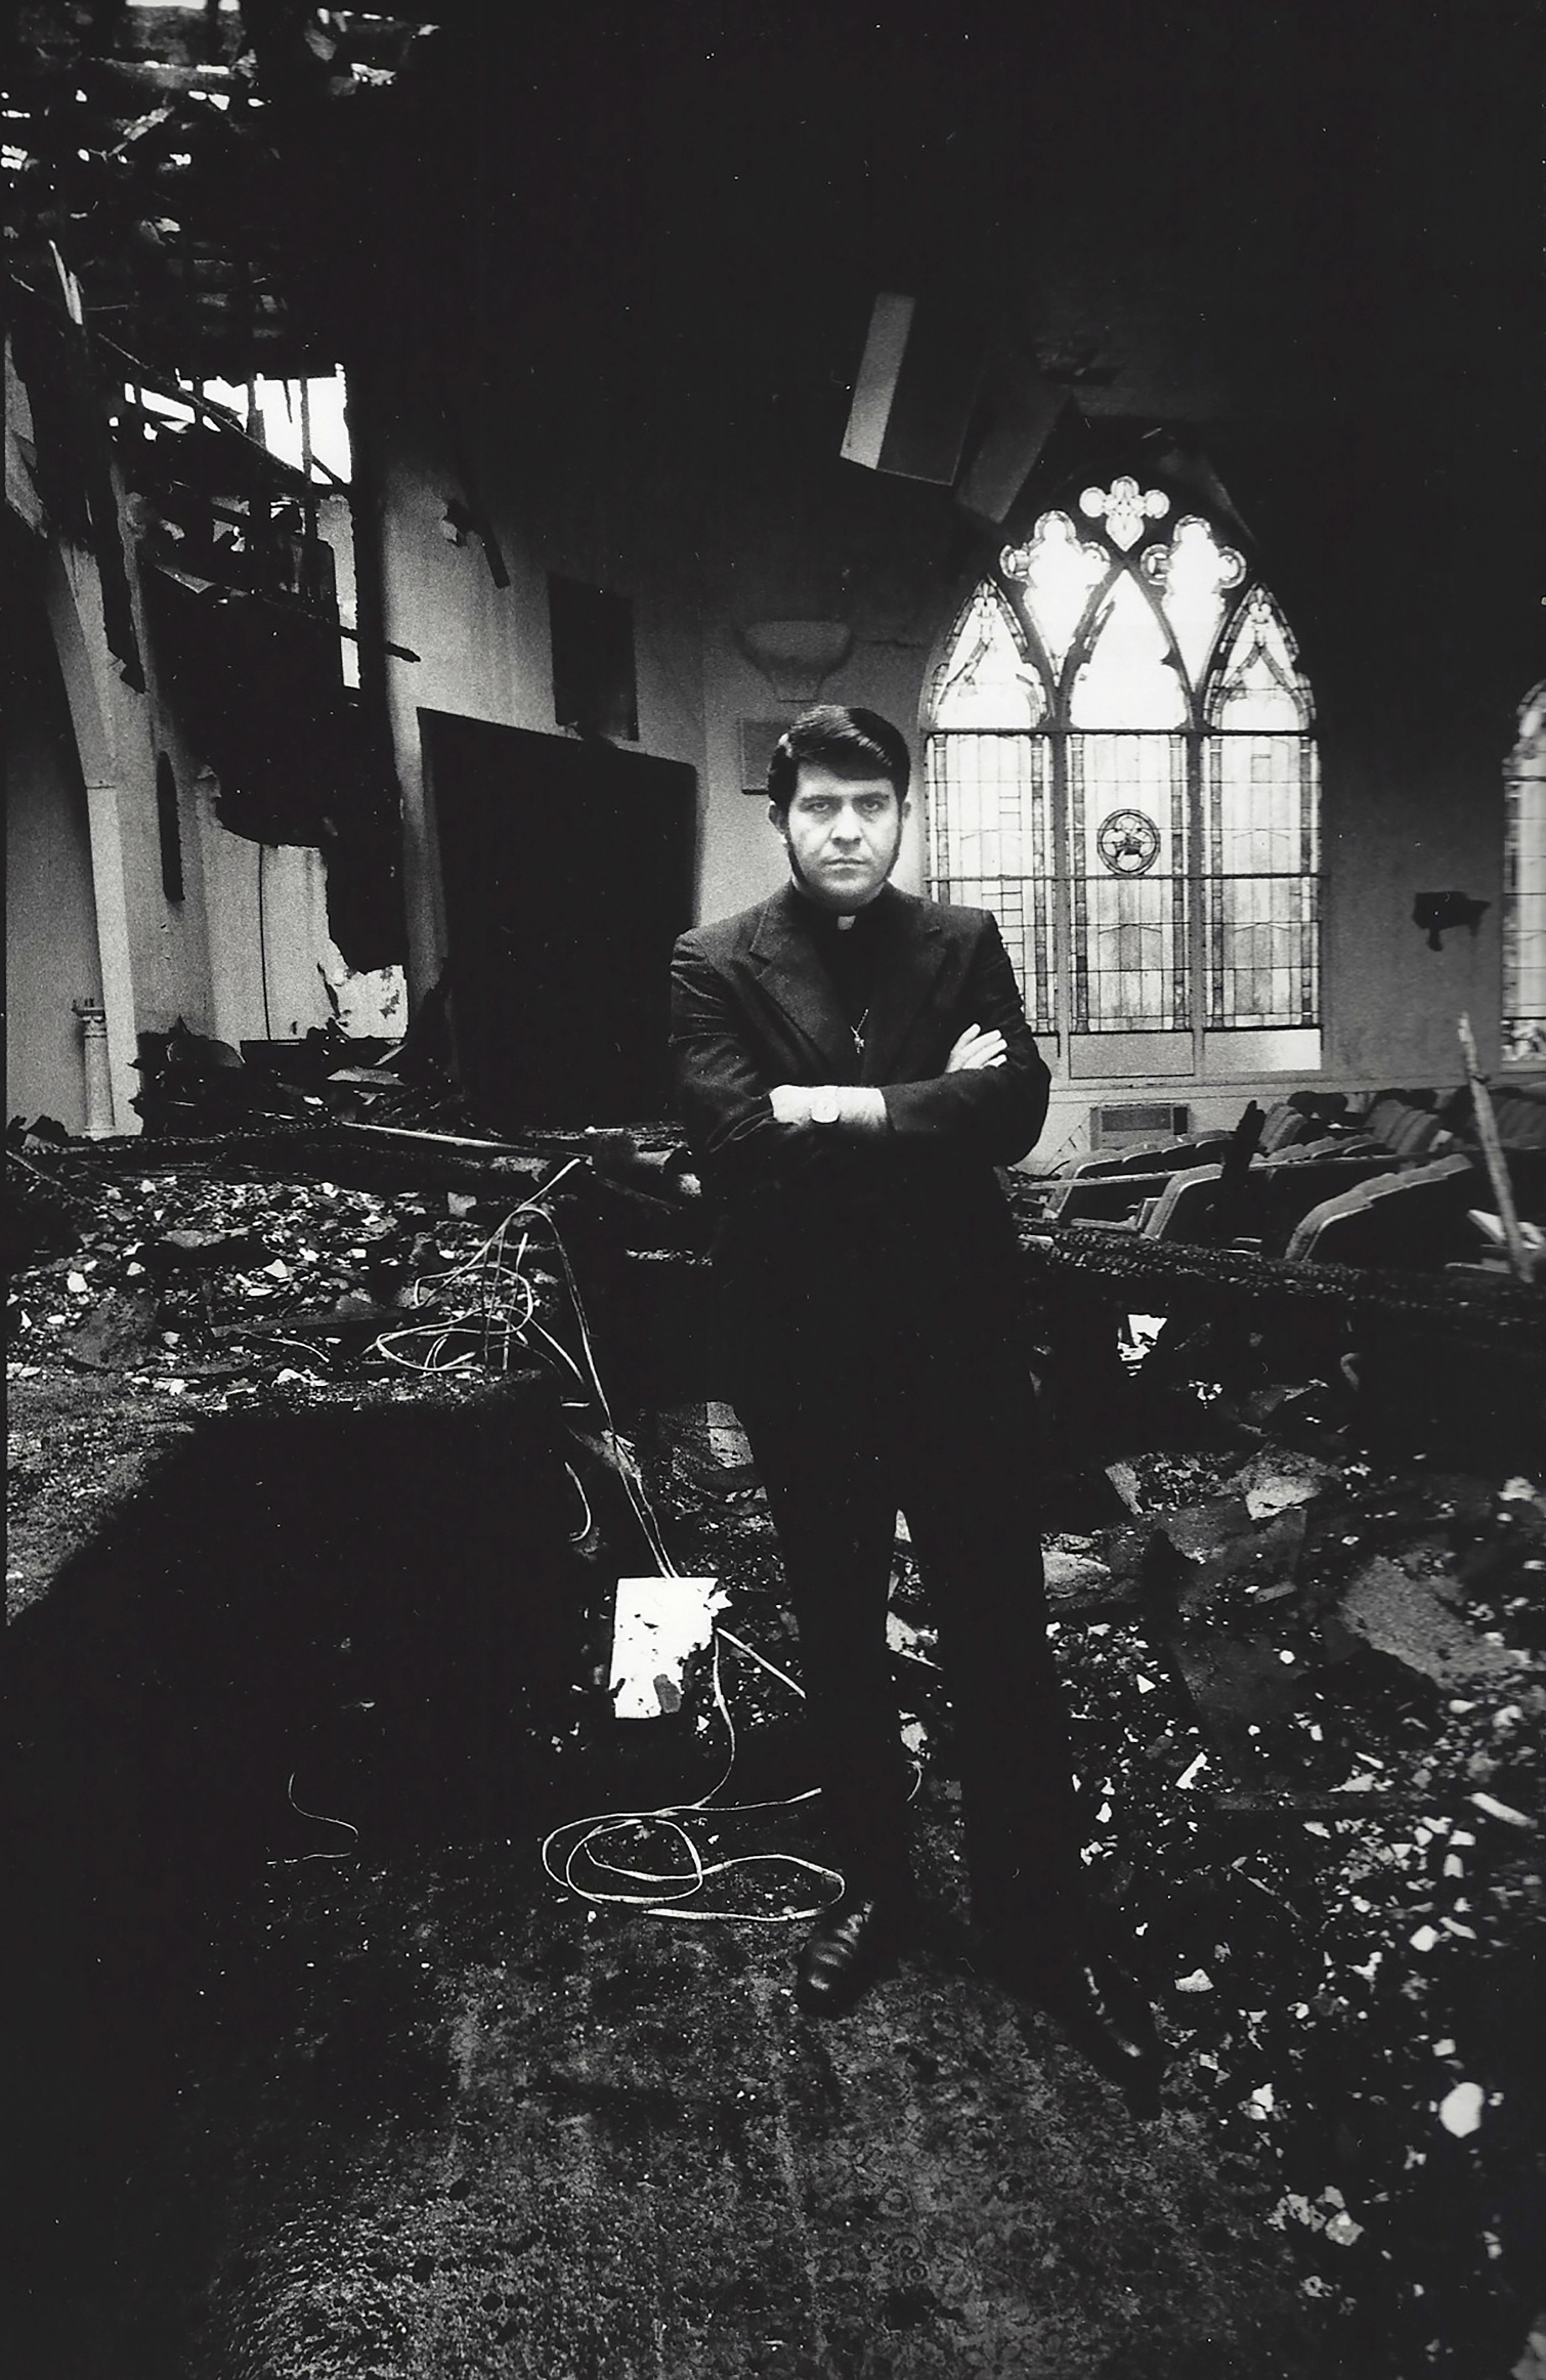 The Reverend Troy Perry, Gay Activist, in his Burnt Down Church, Los Angeles, 1973.